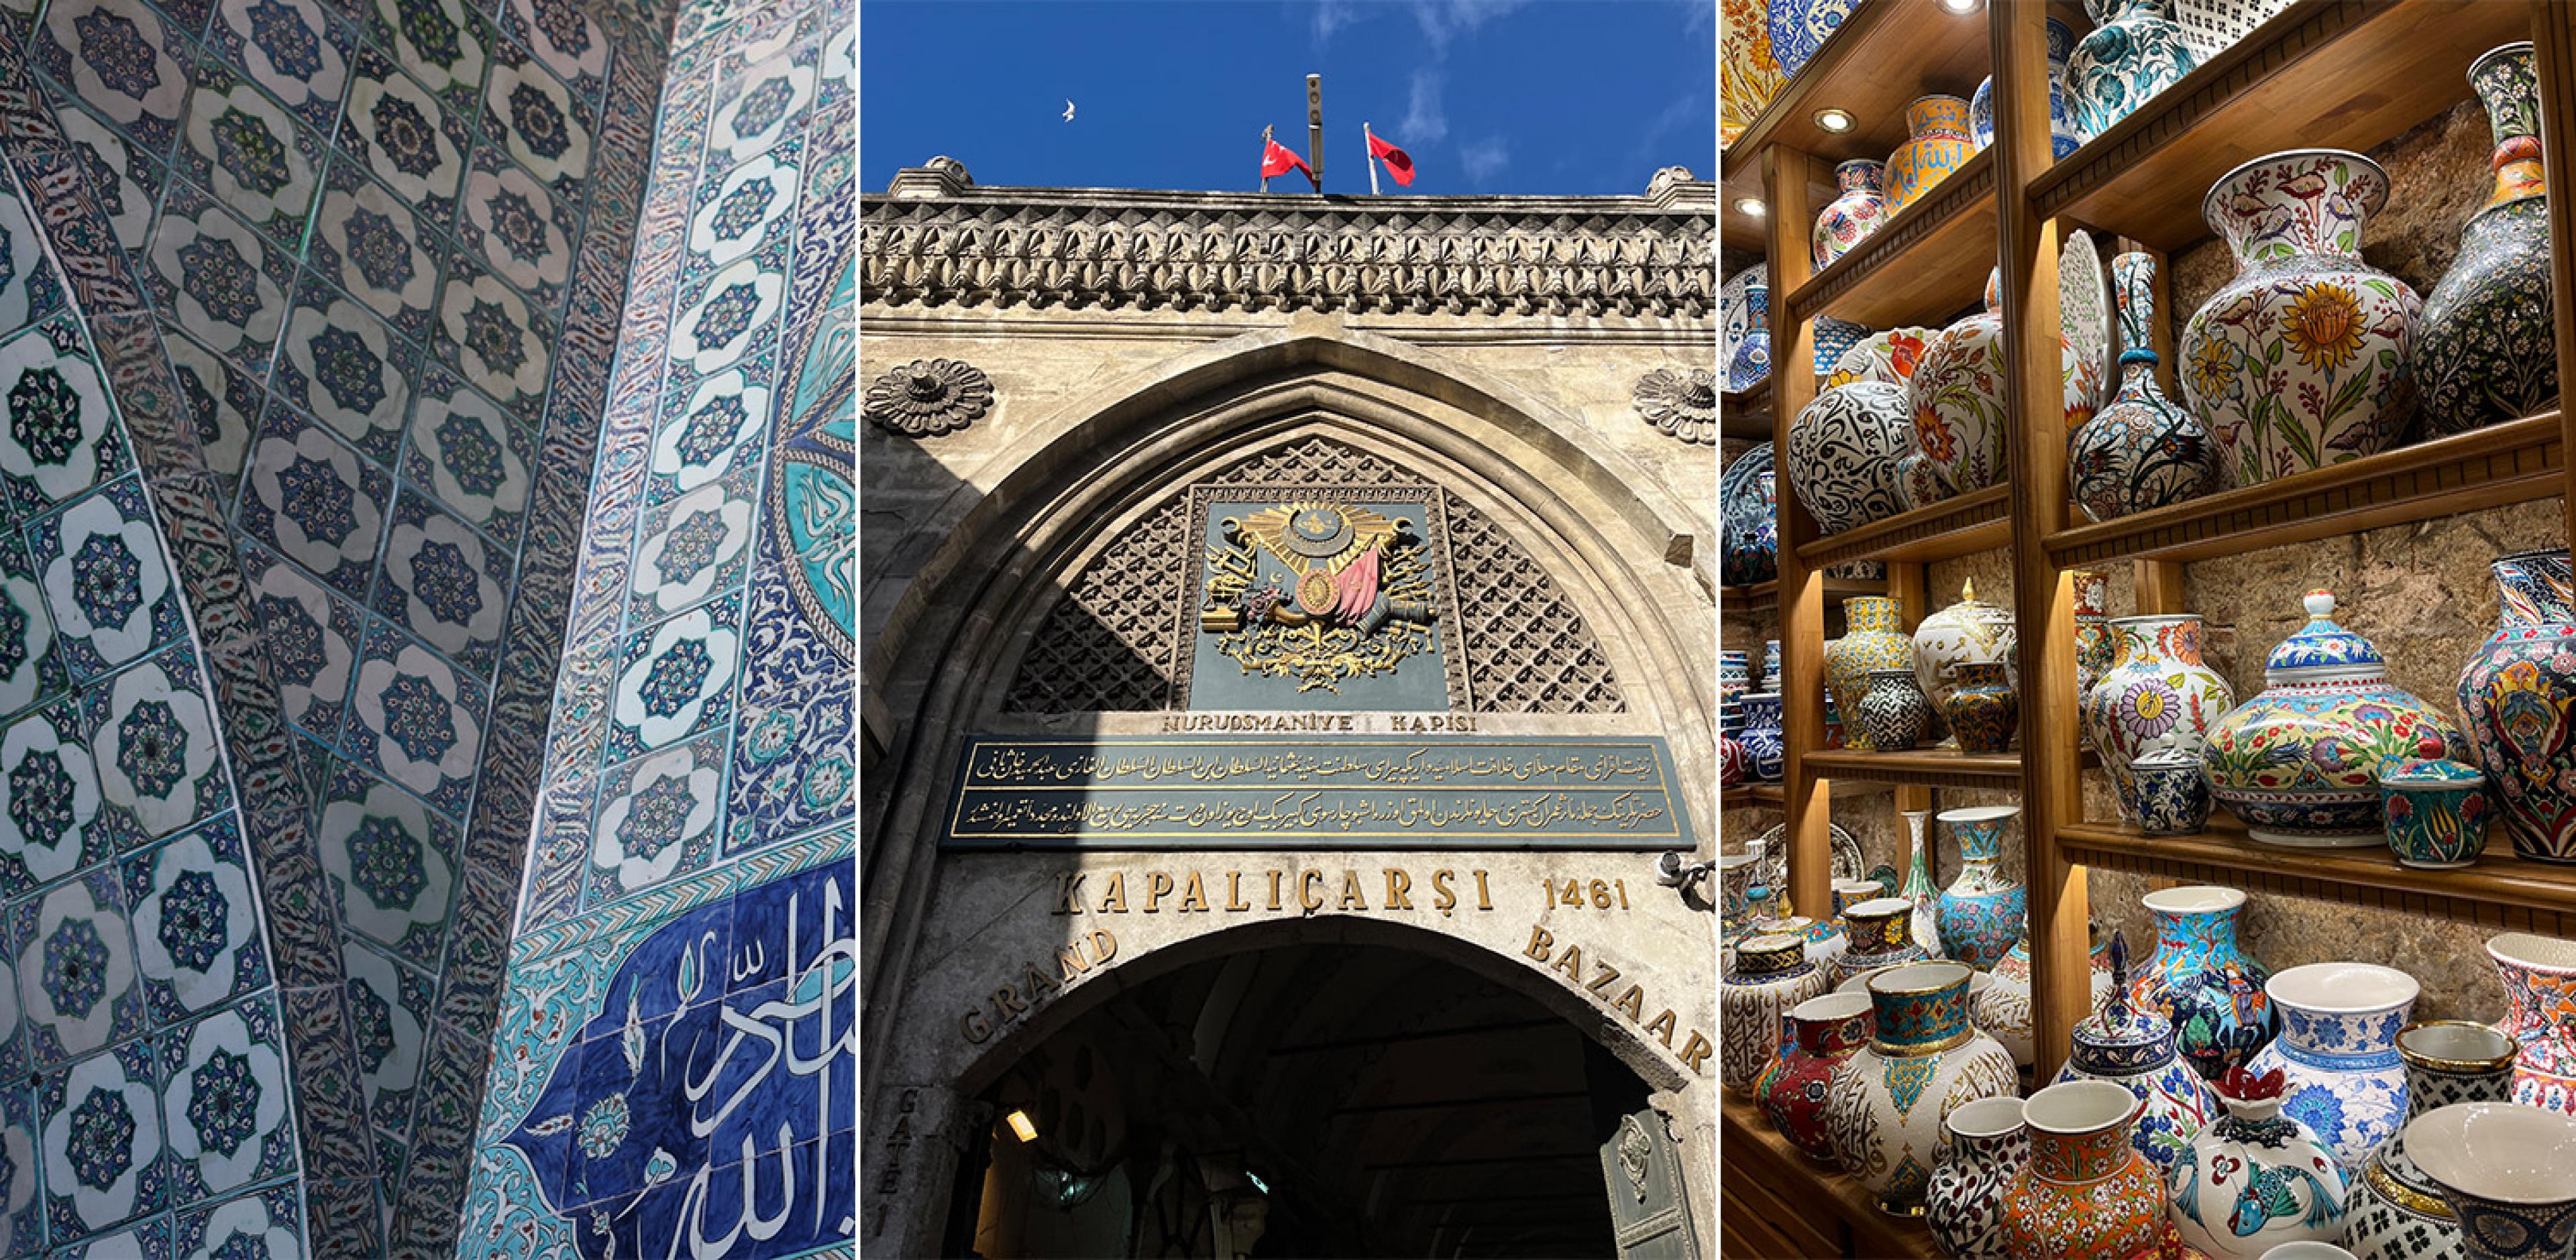 three scenes from istanbul: details of tilework, the entrance to the grand bazaar and ceramics on view in a boutique